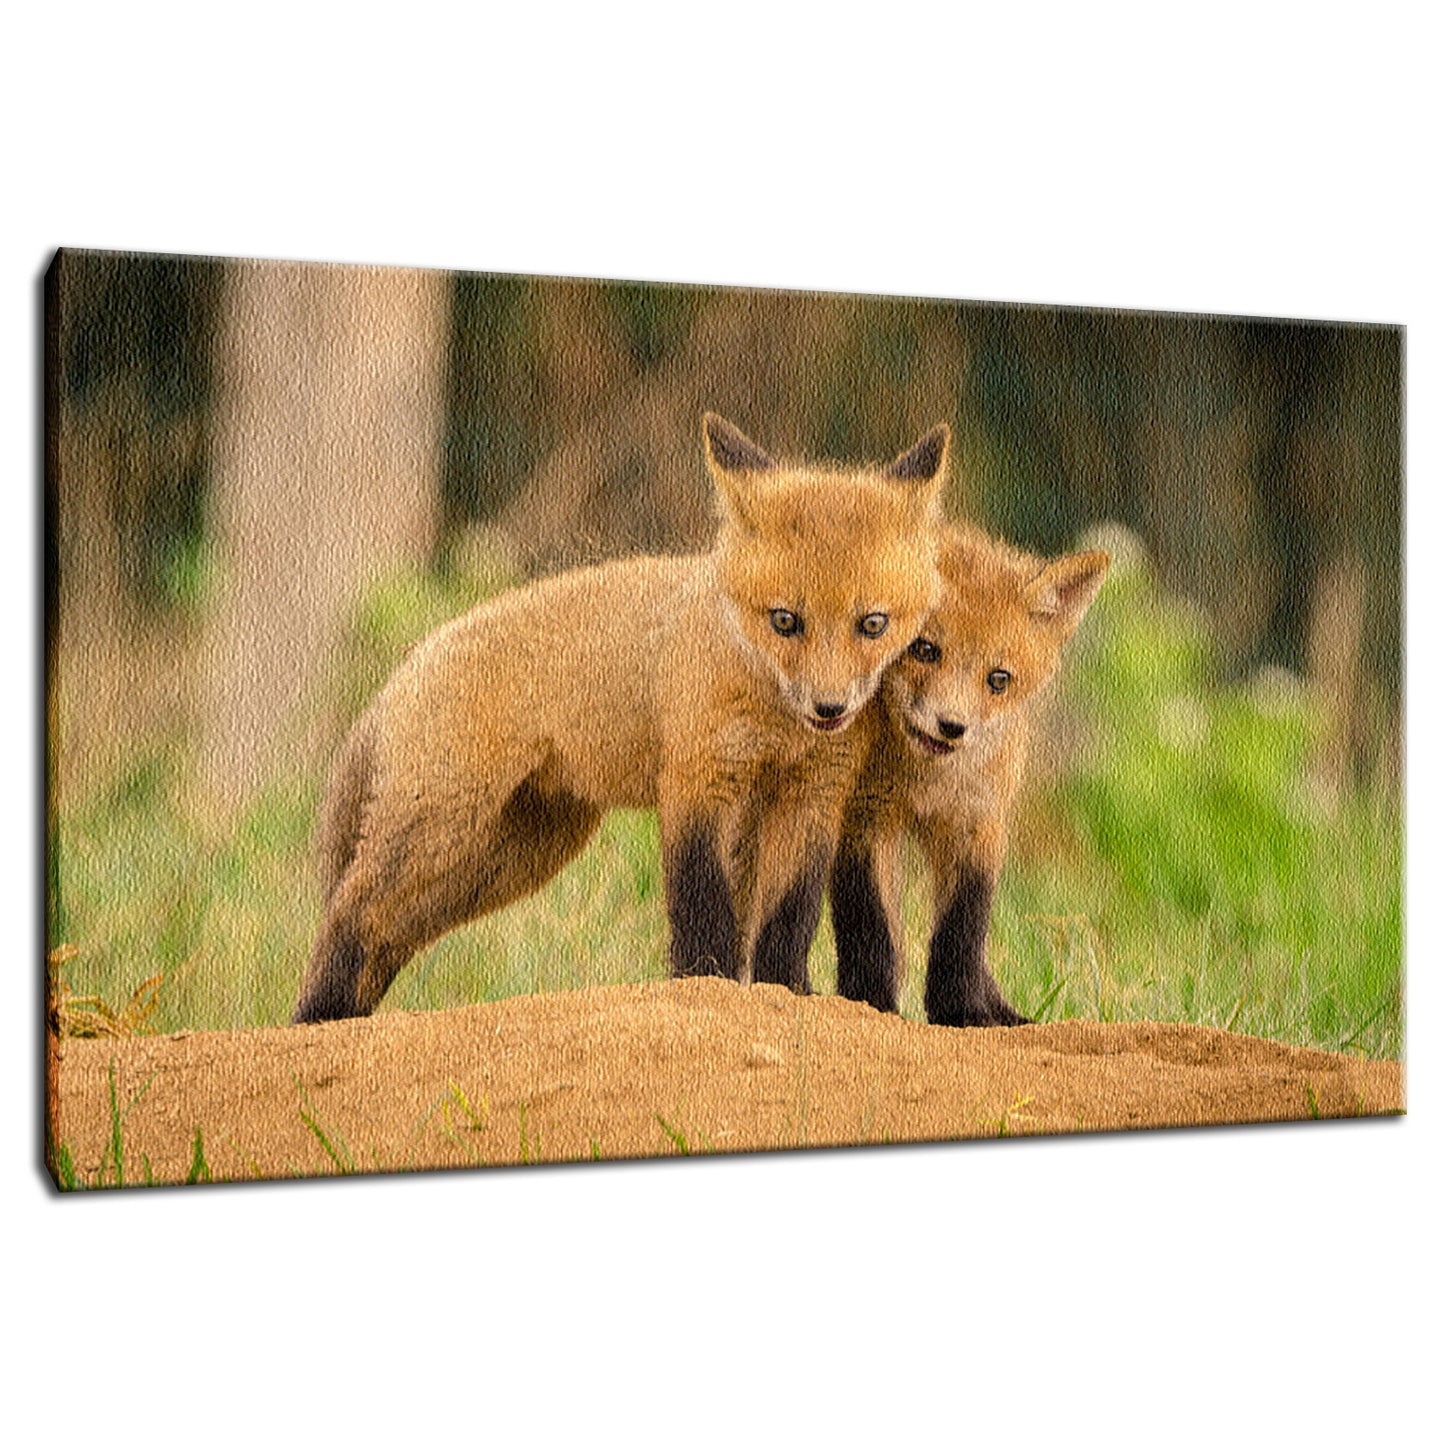 Close to You Animal / Wildlife Photograph Fine Art Canvas & Unframed Wall Art Prints  - PIPAFINEART